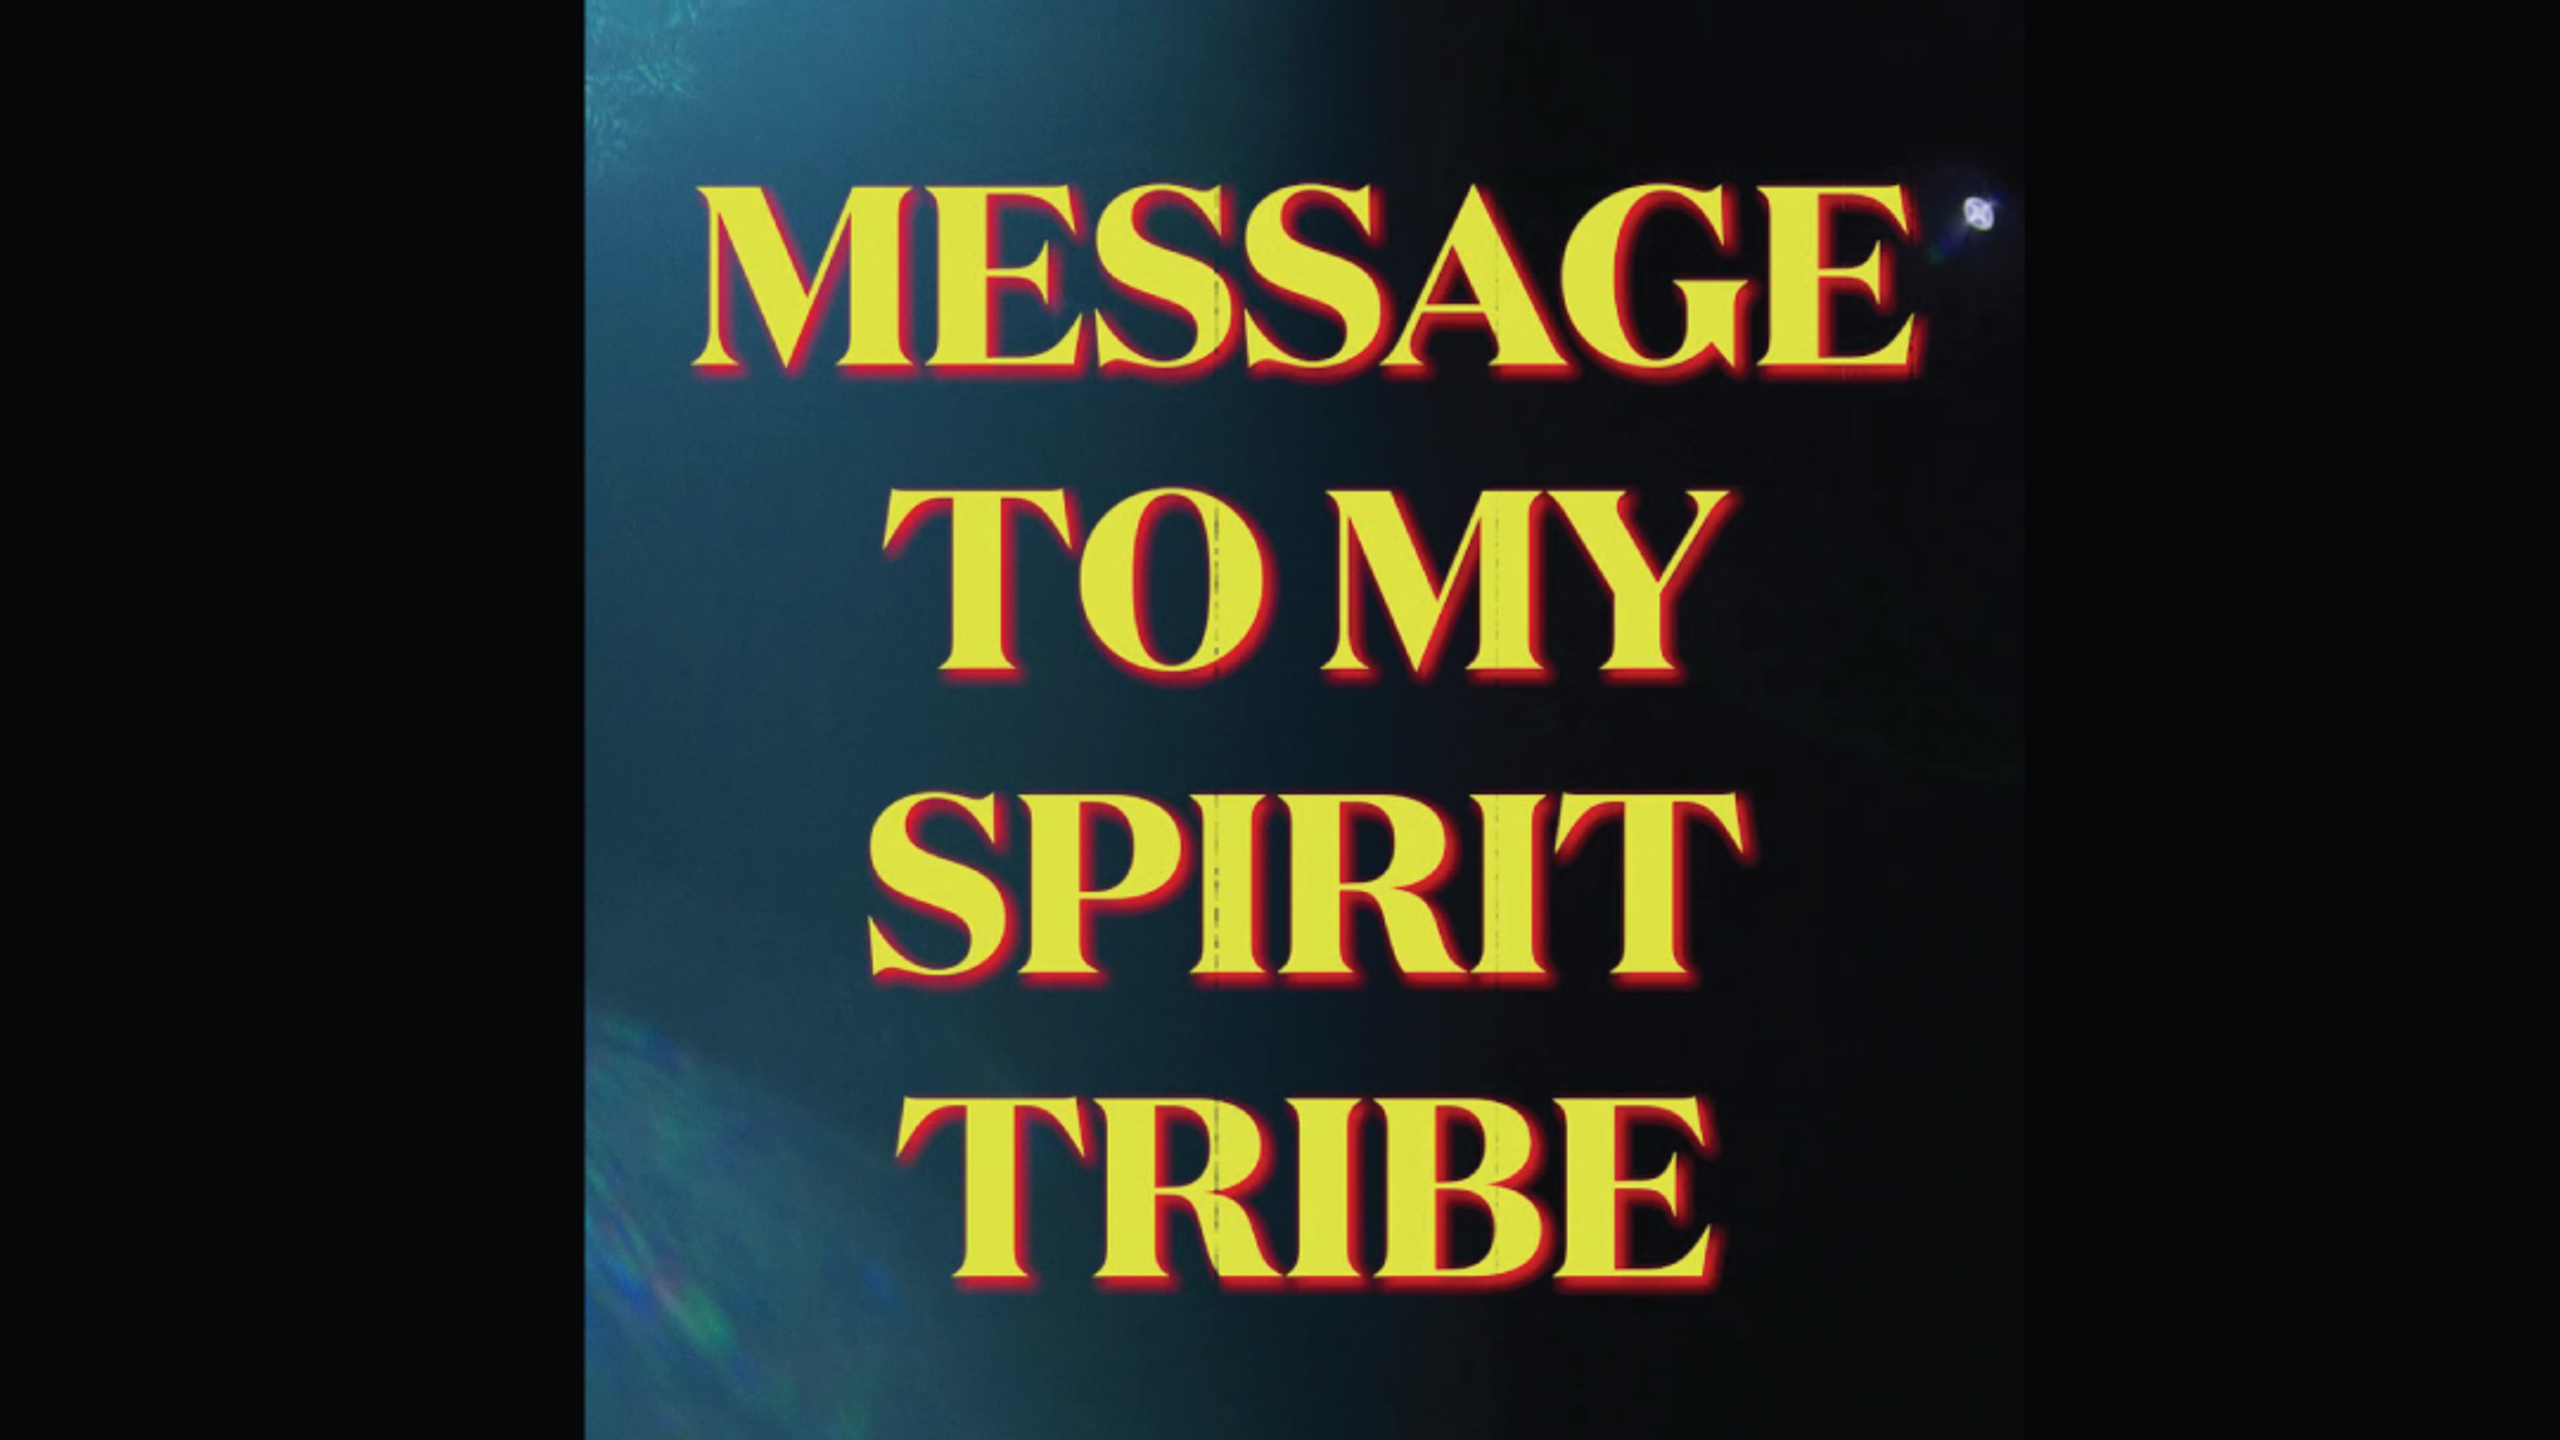 MESSAGE TO MY SPIRIT TRIBE!